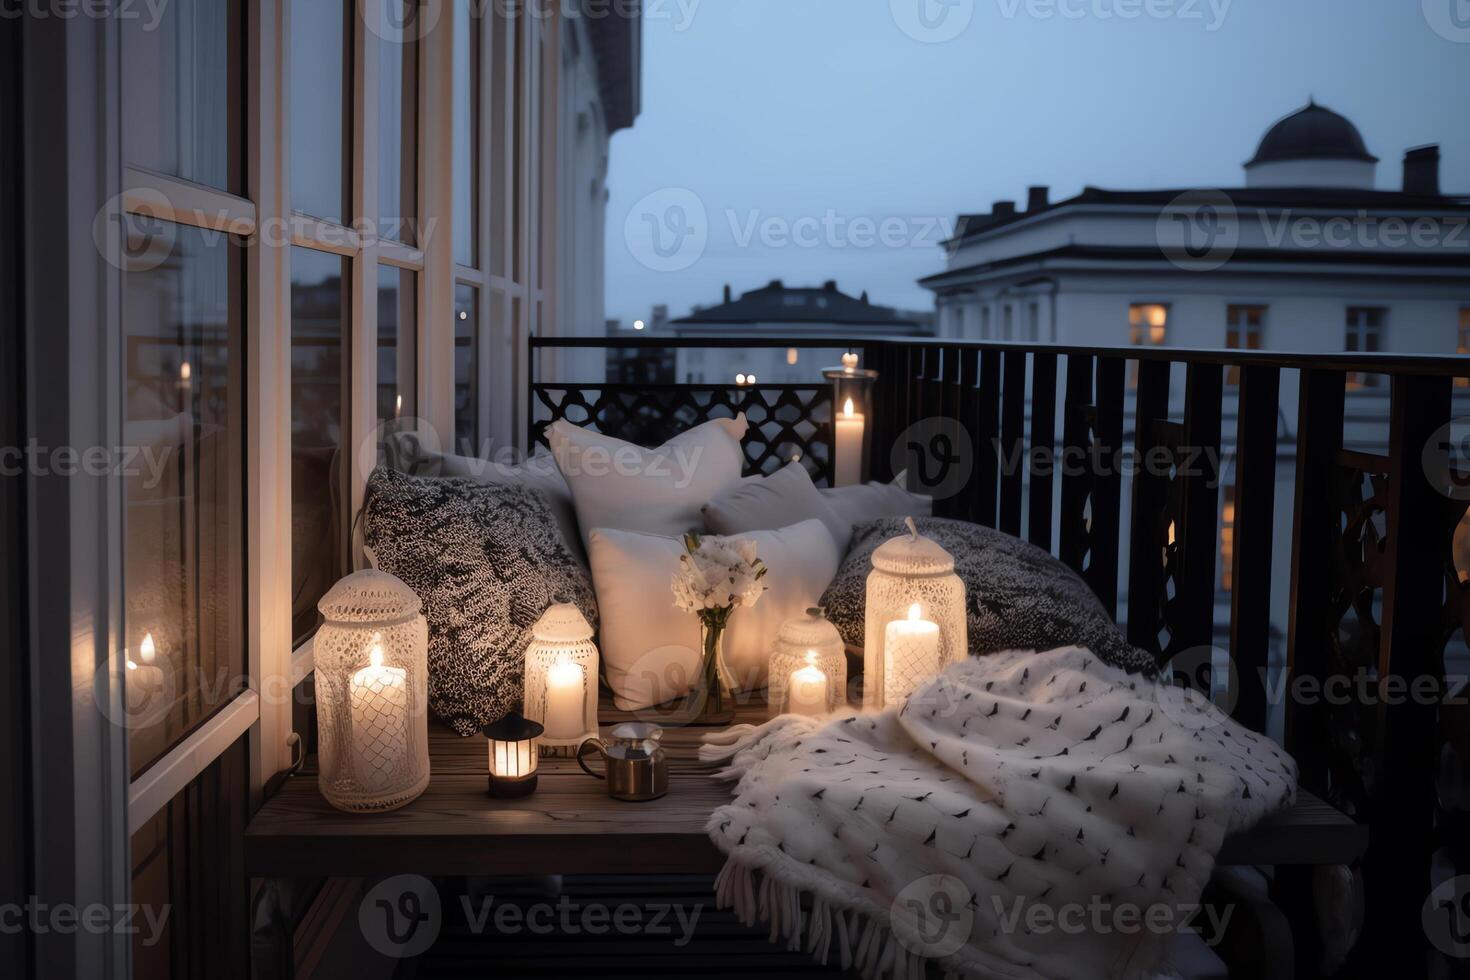 Balcony Design Cute Pillows Decorative Candles And Lighting With Com And Table Armchairs photo